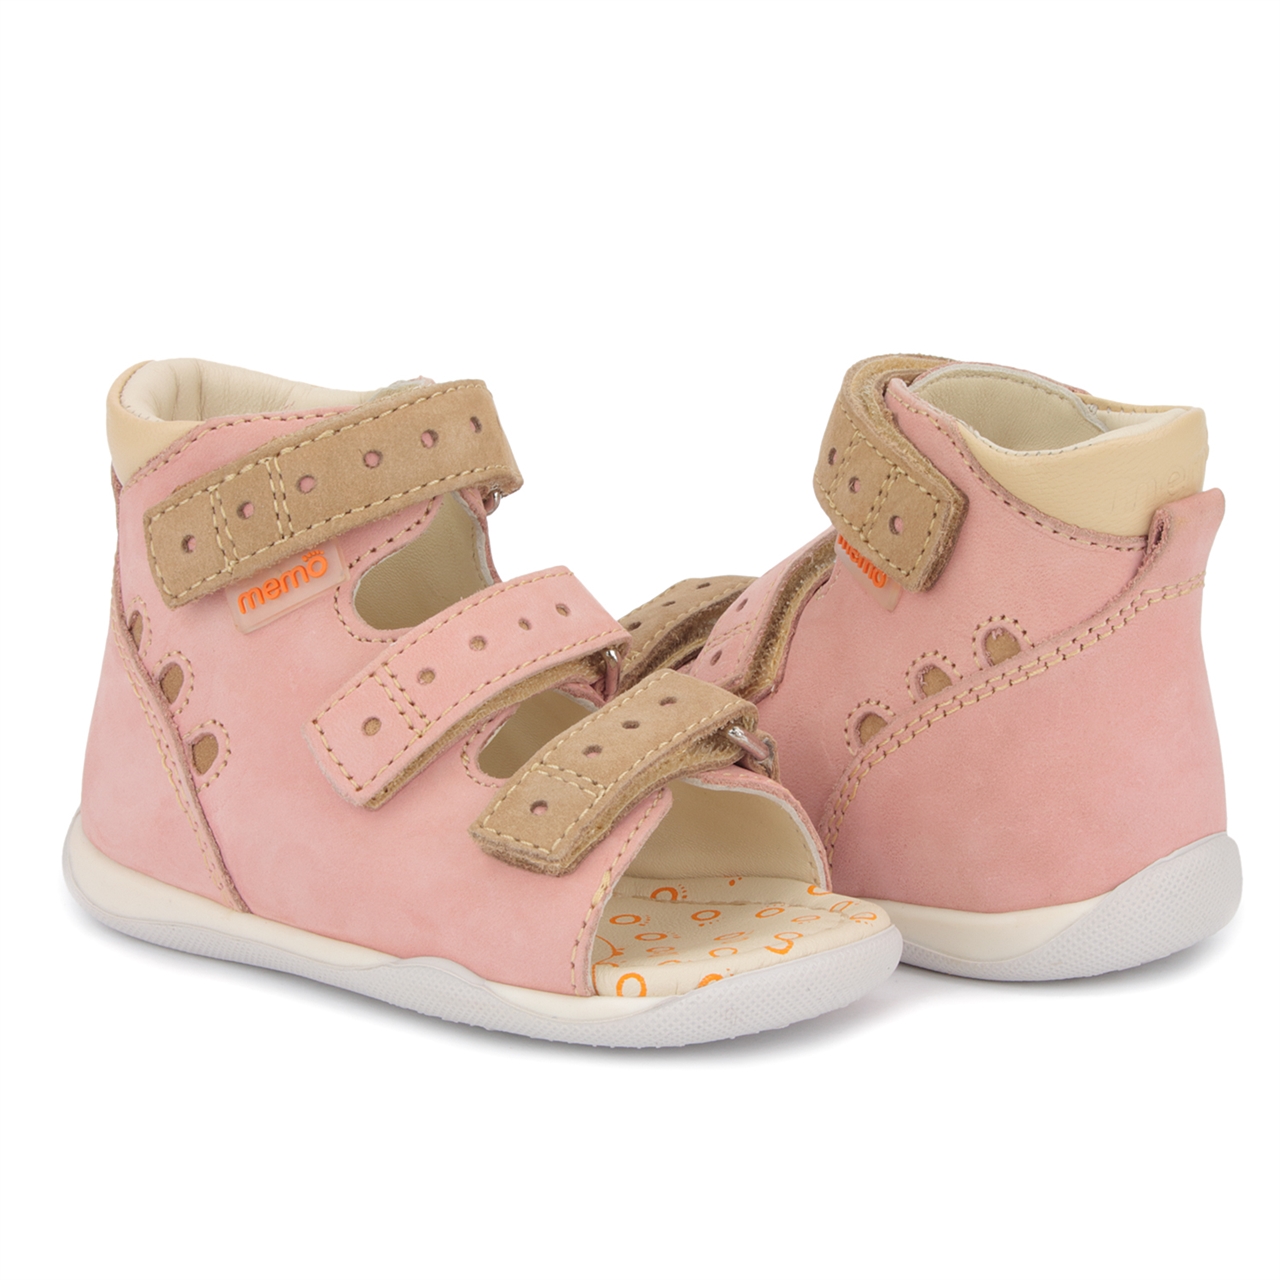 orthopedic shoes for baby girl